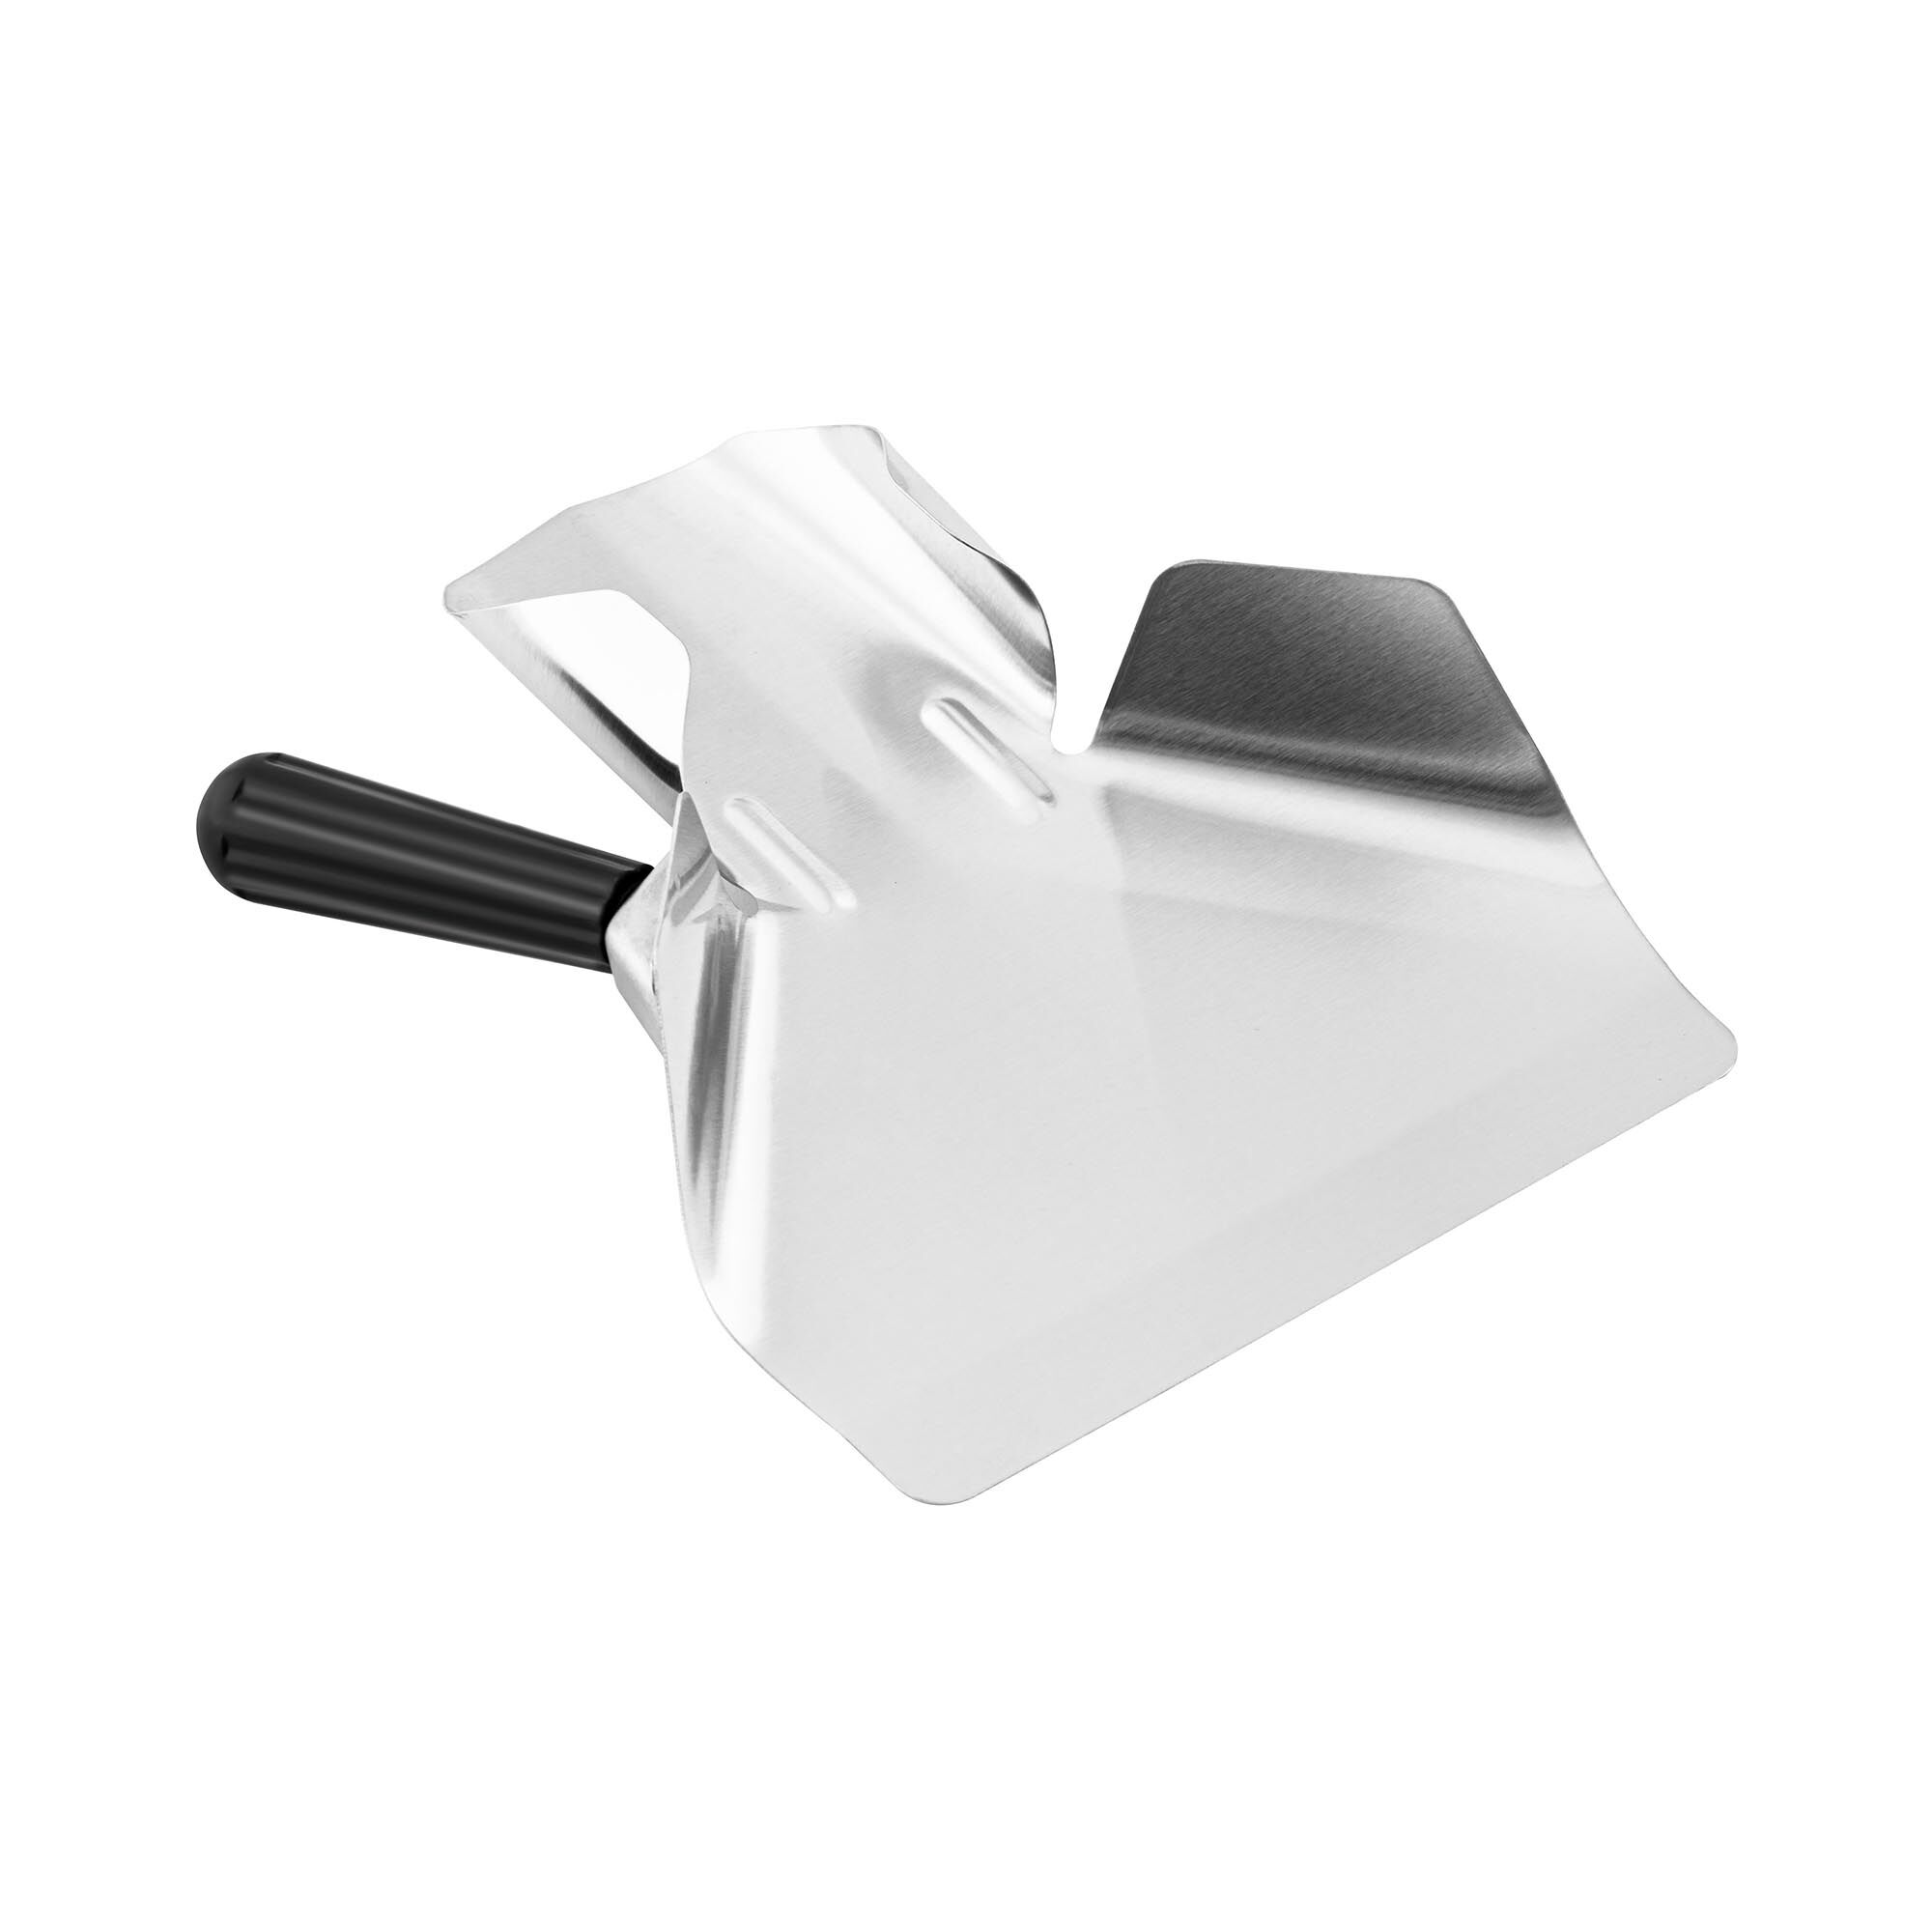 Royal Catering Fries Scoop - for right-handed users